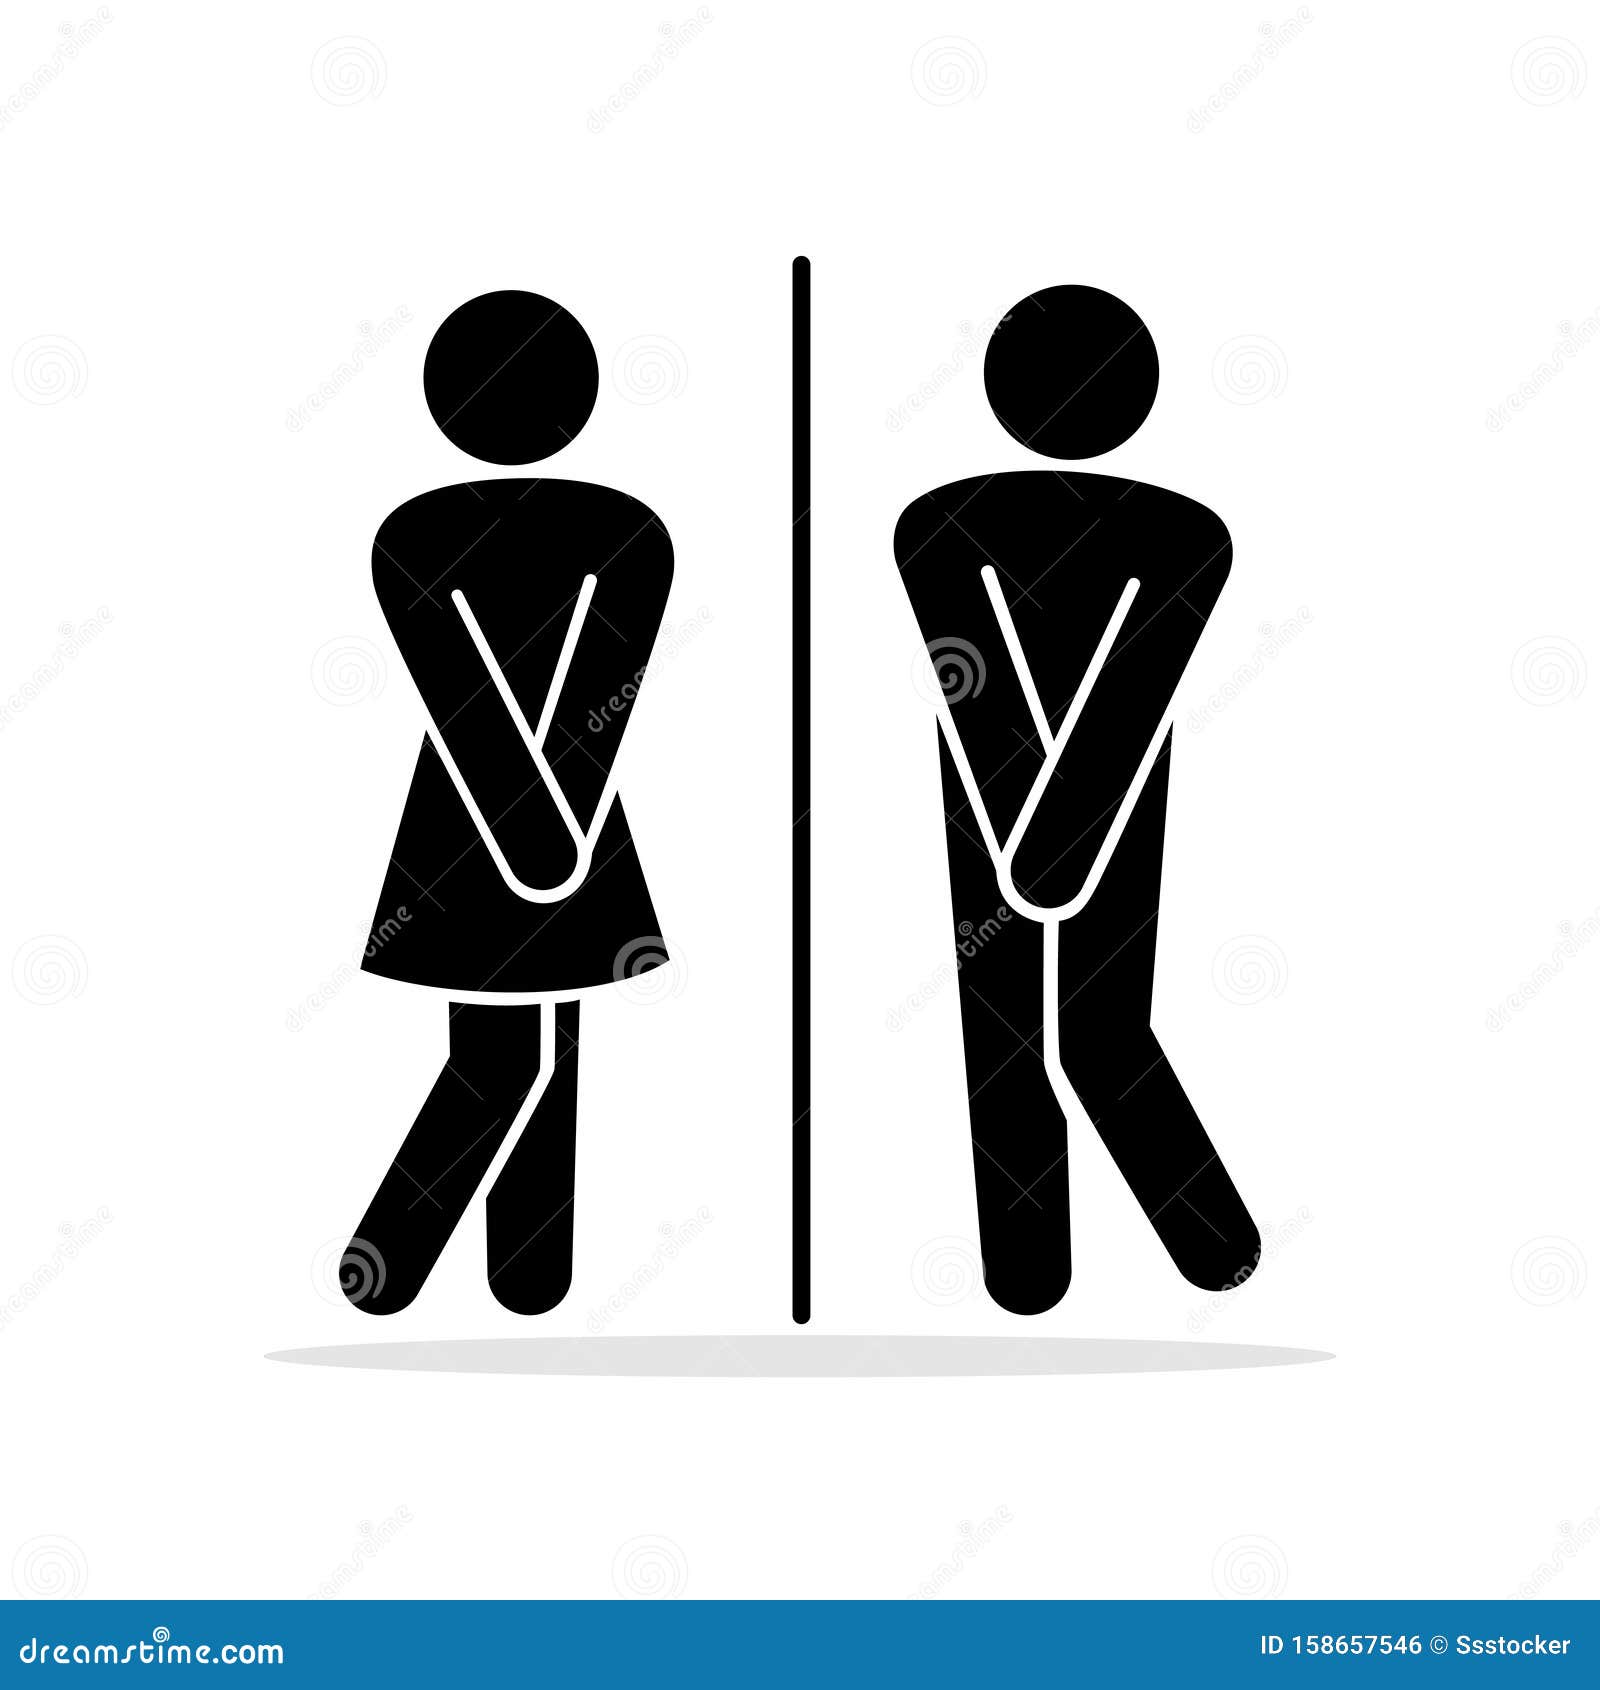 in different sizes & colours Details about   Male & Female Crossed Legs Toilet Door Sign 